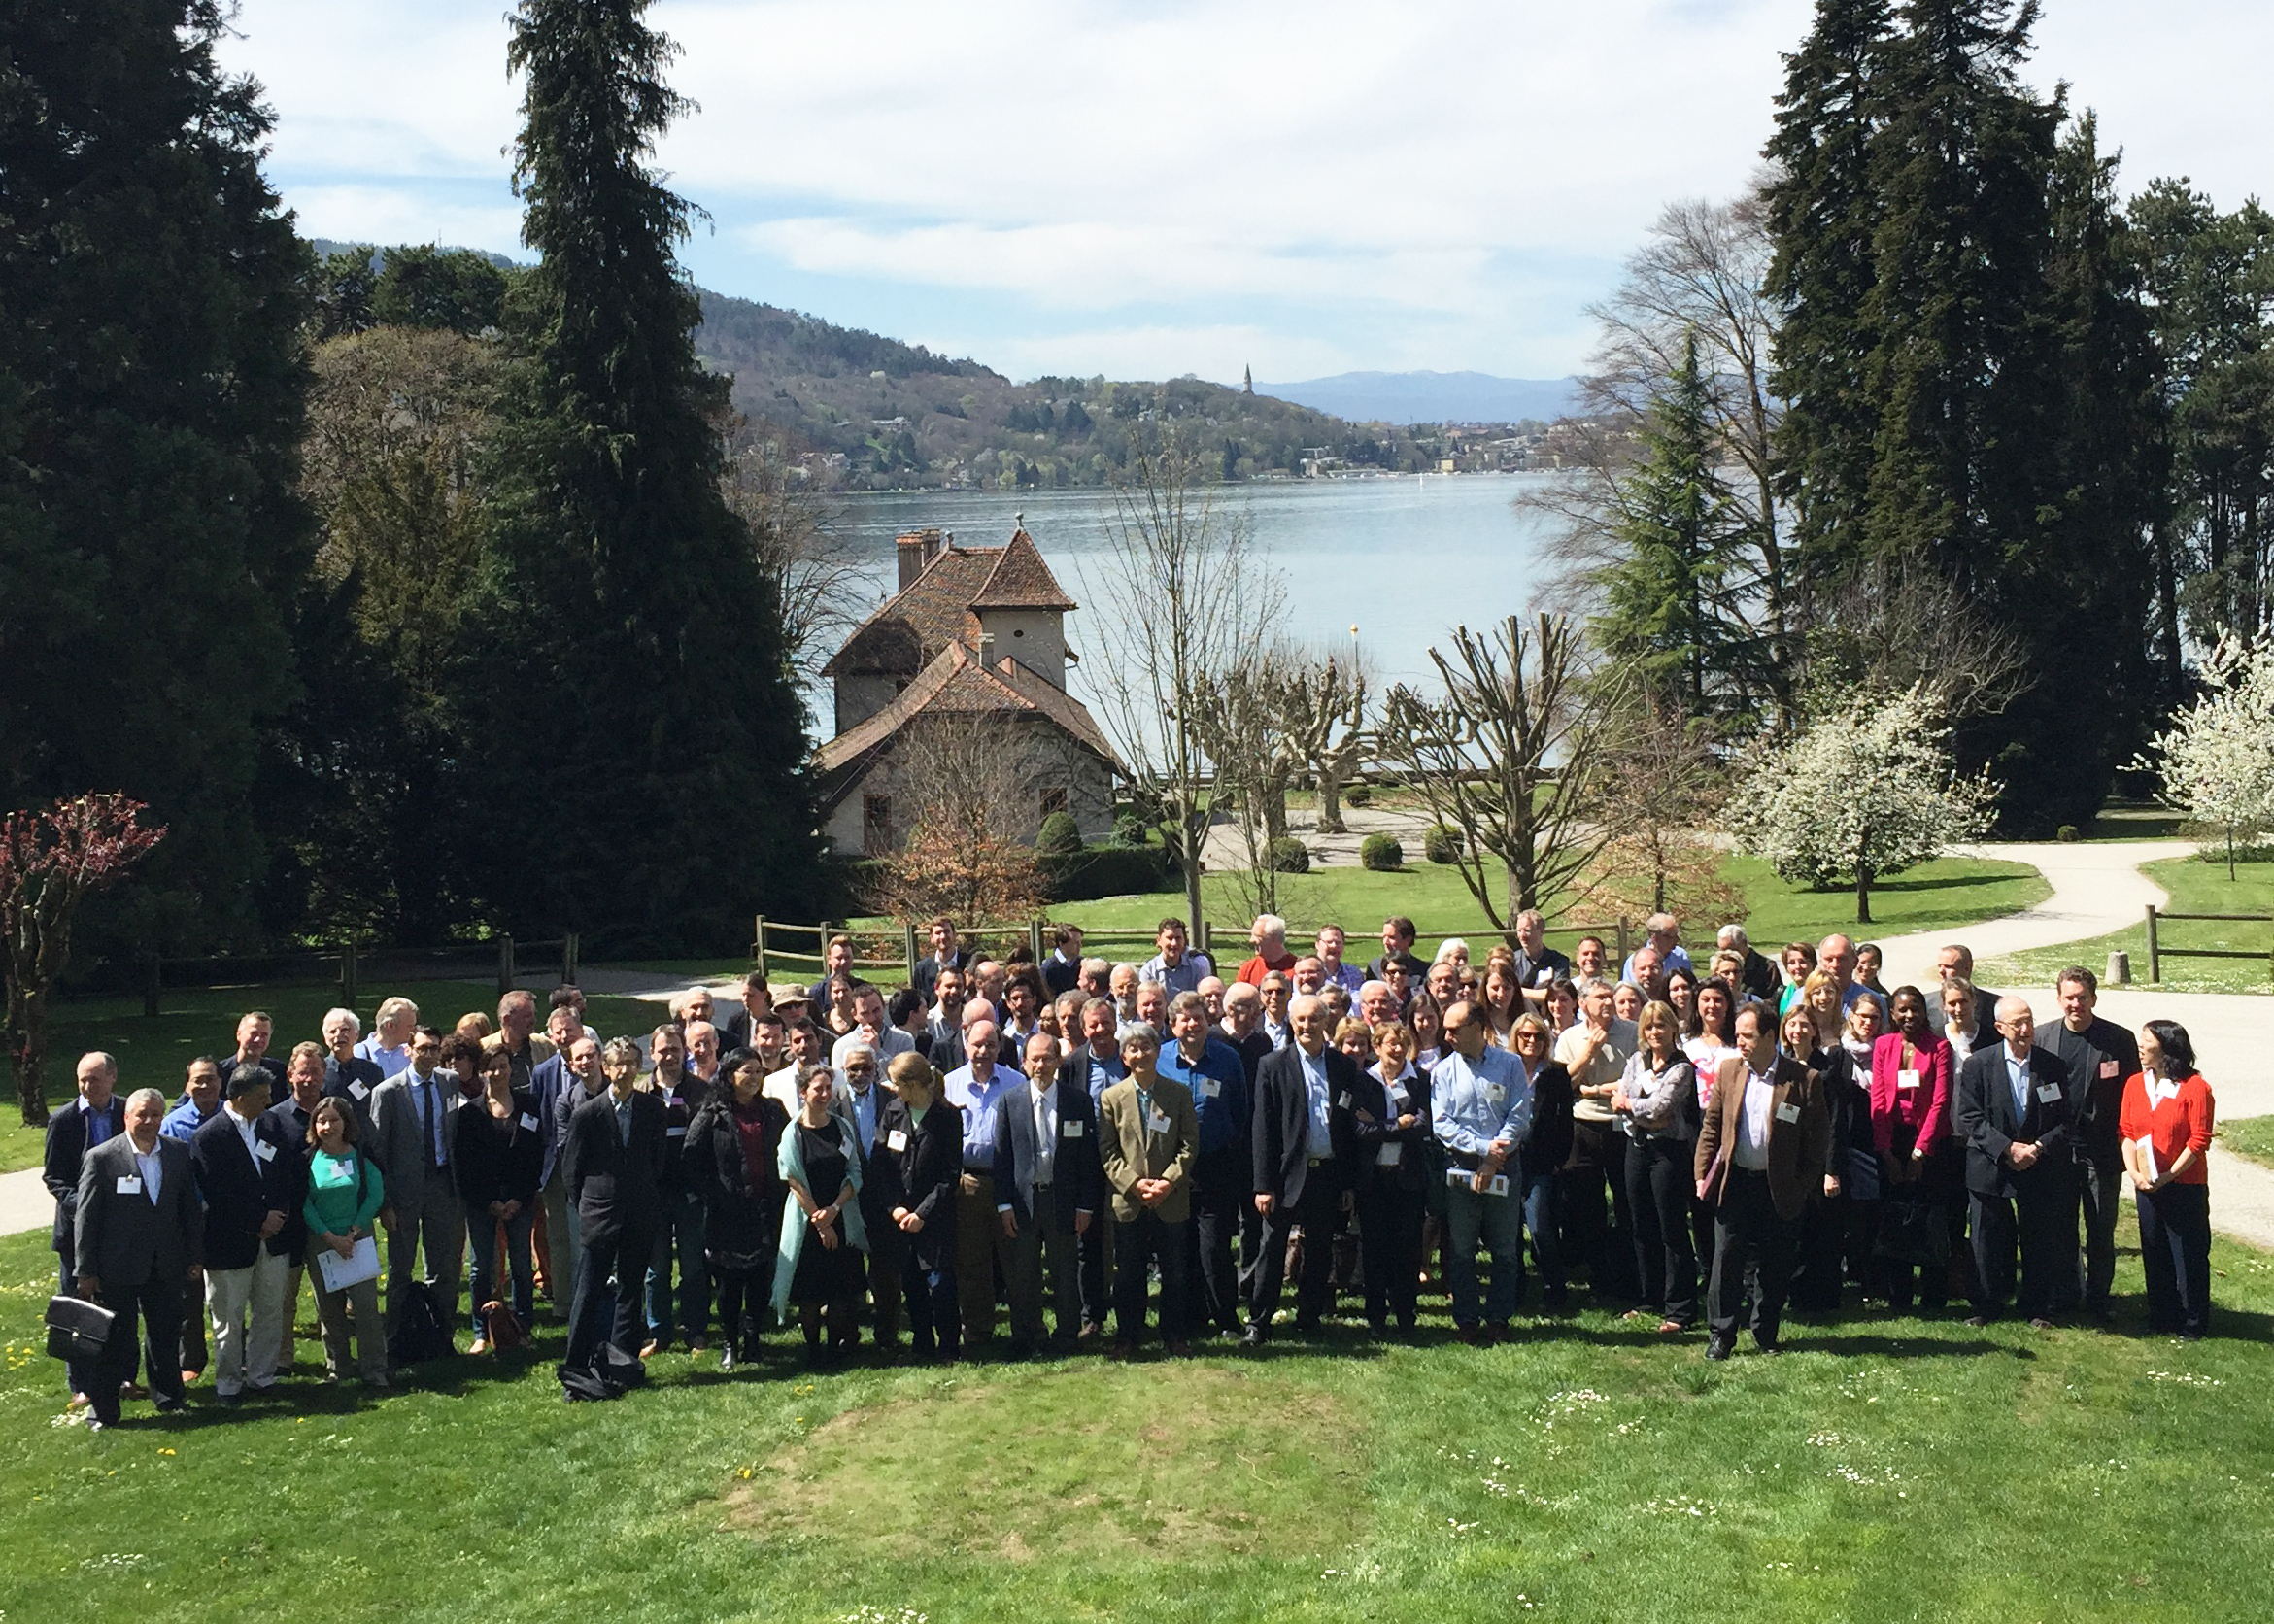 2015 HKS Meeting Participants in Annecy, France.